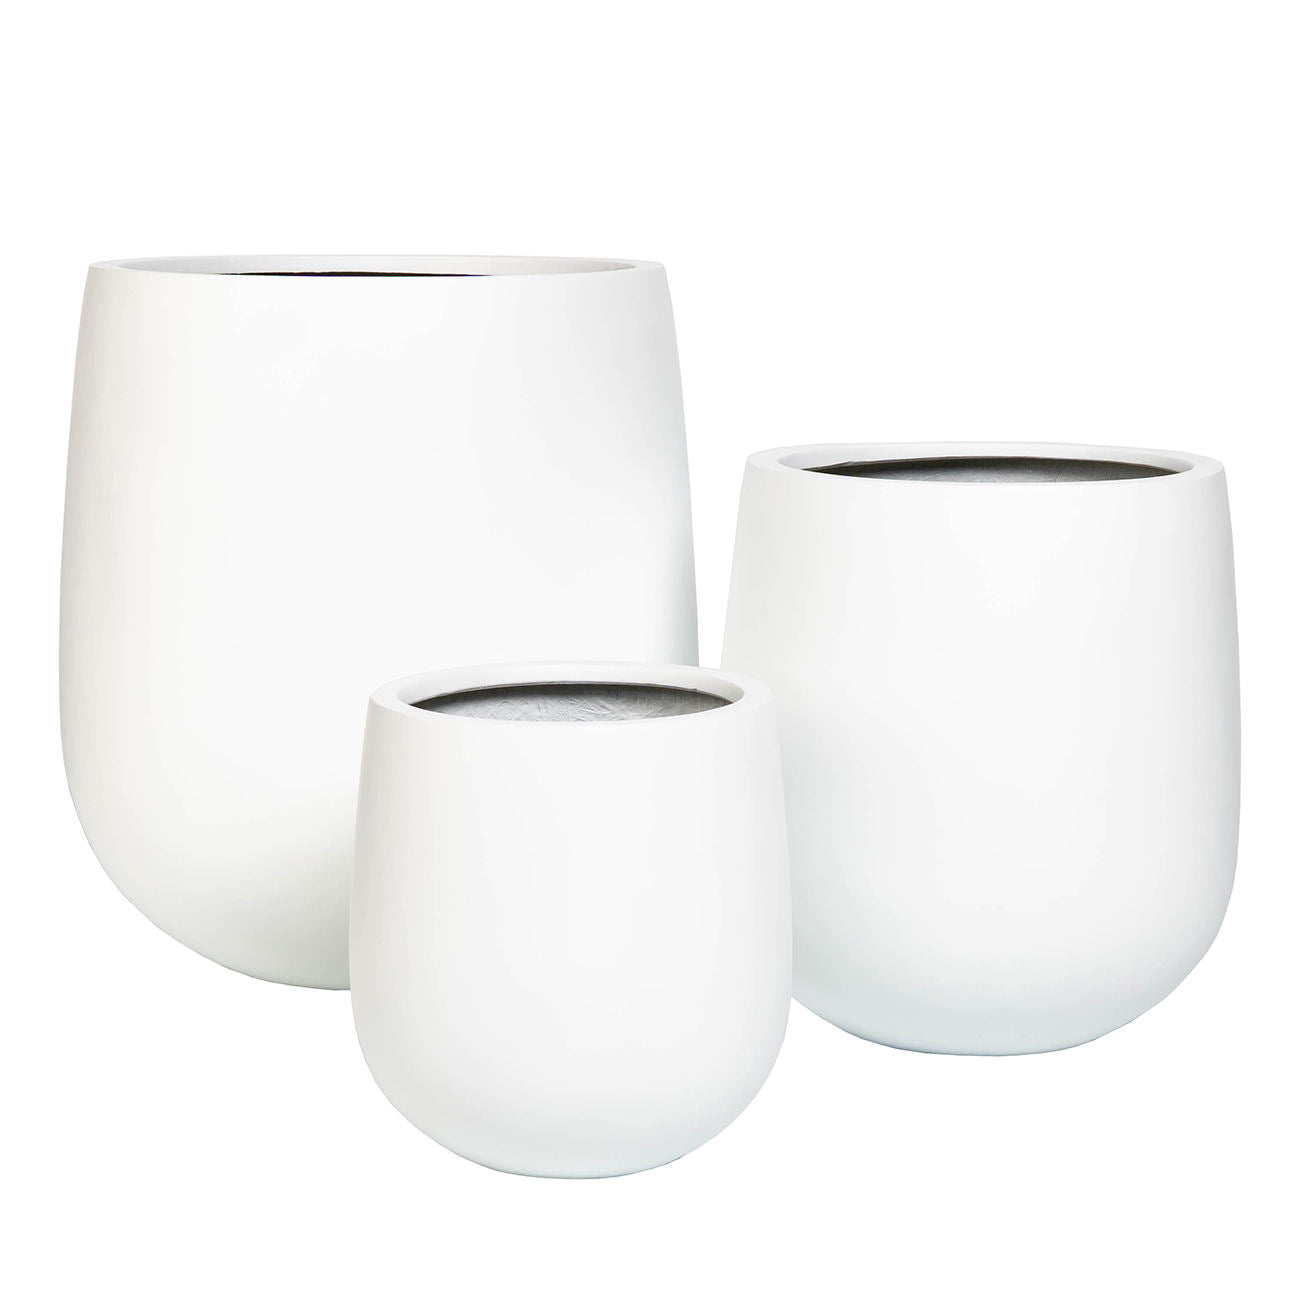 White fiberglass pots and planter large sizes for flower garden outdoor Graceland Home and Living